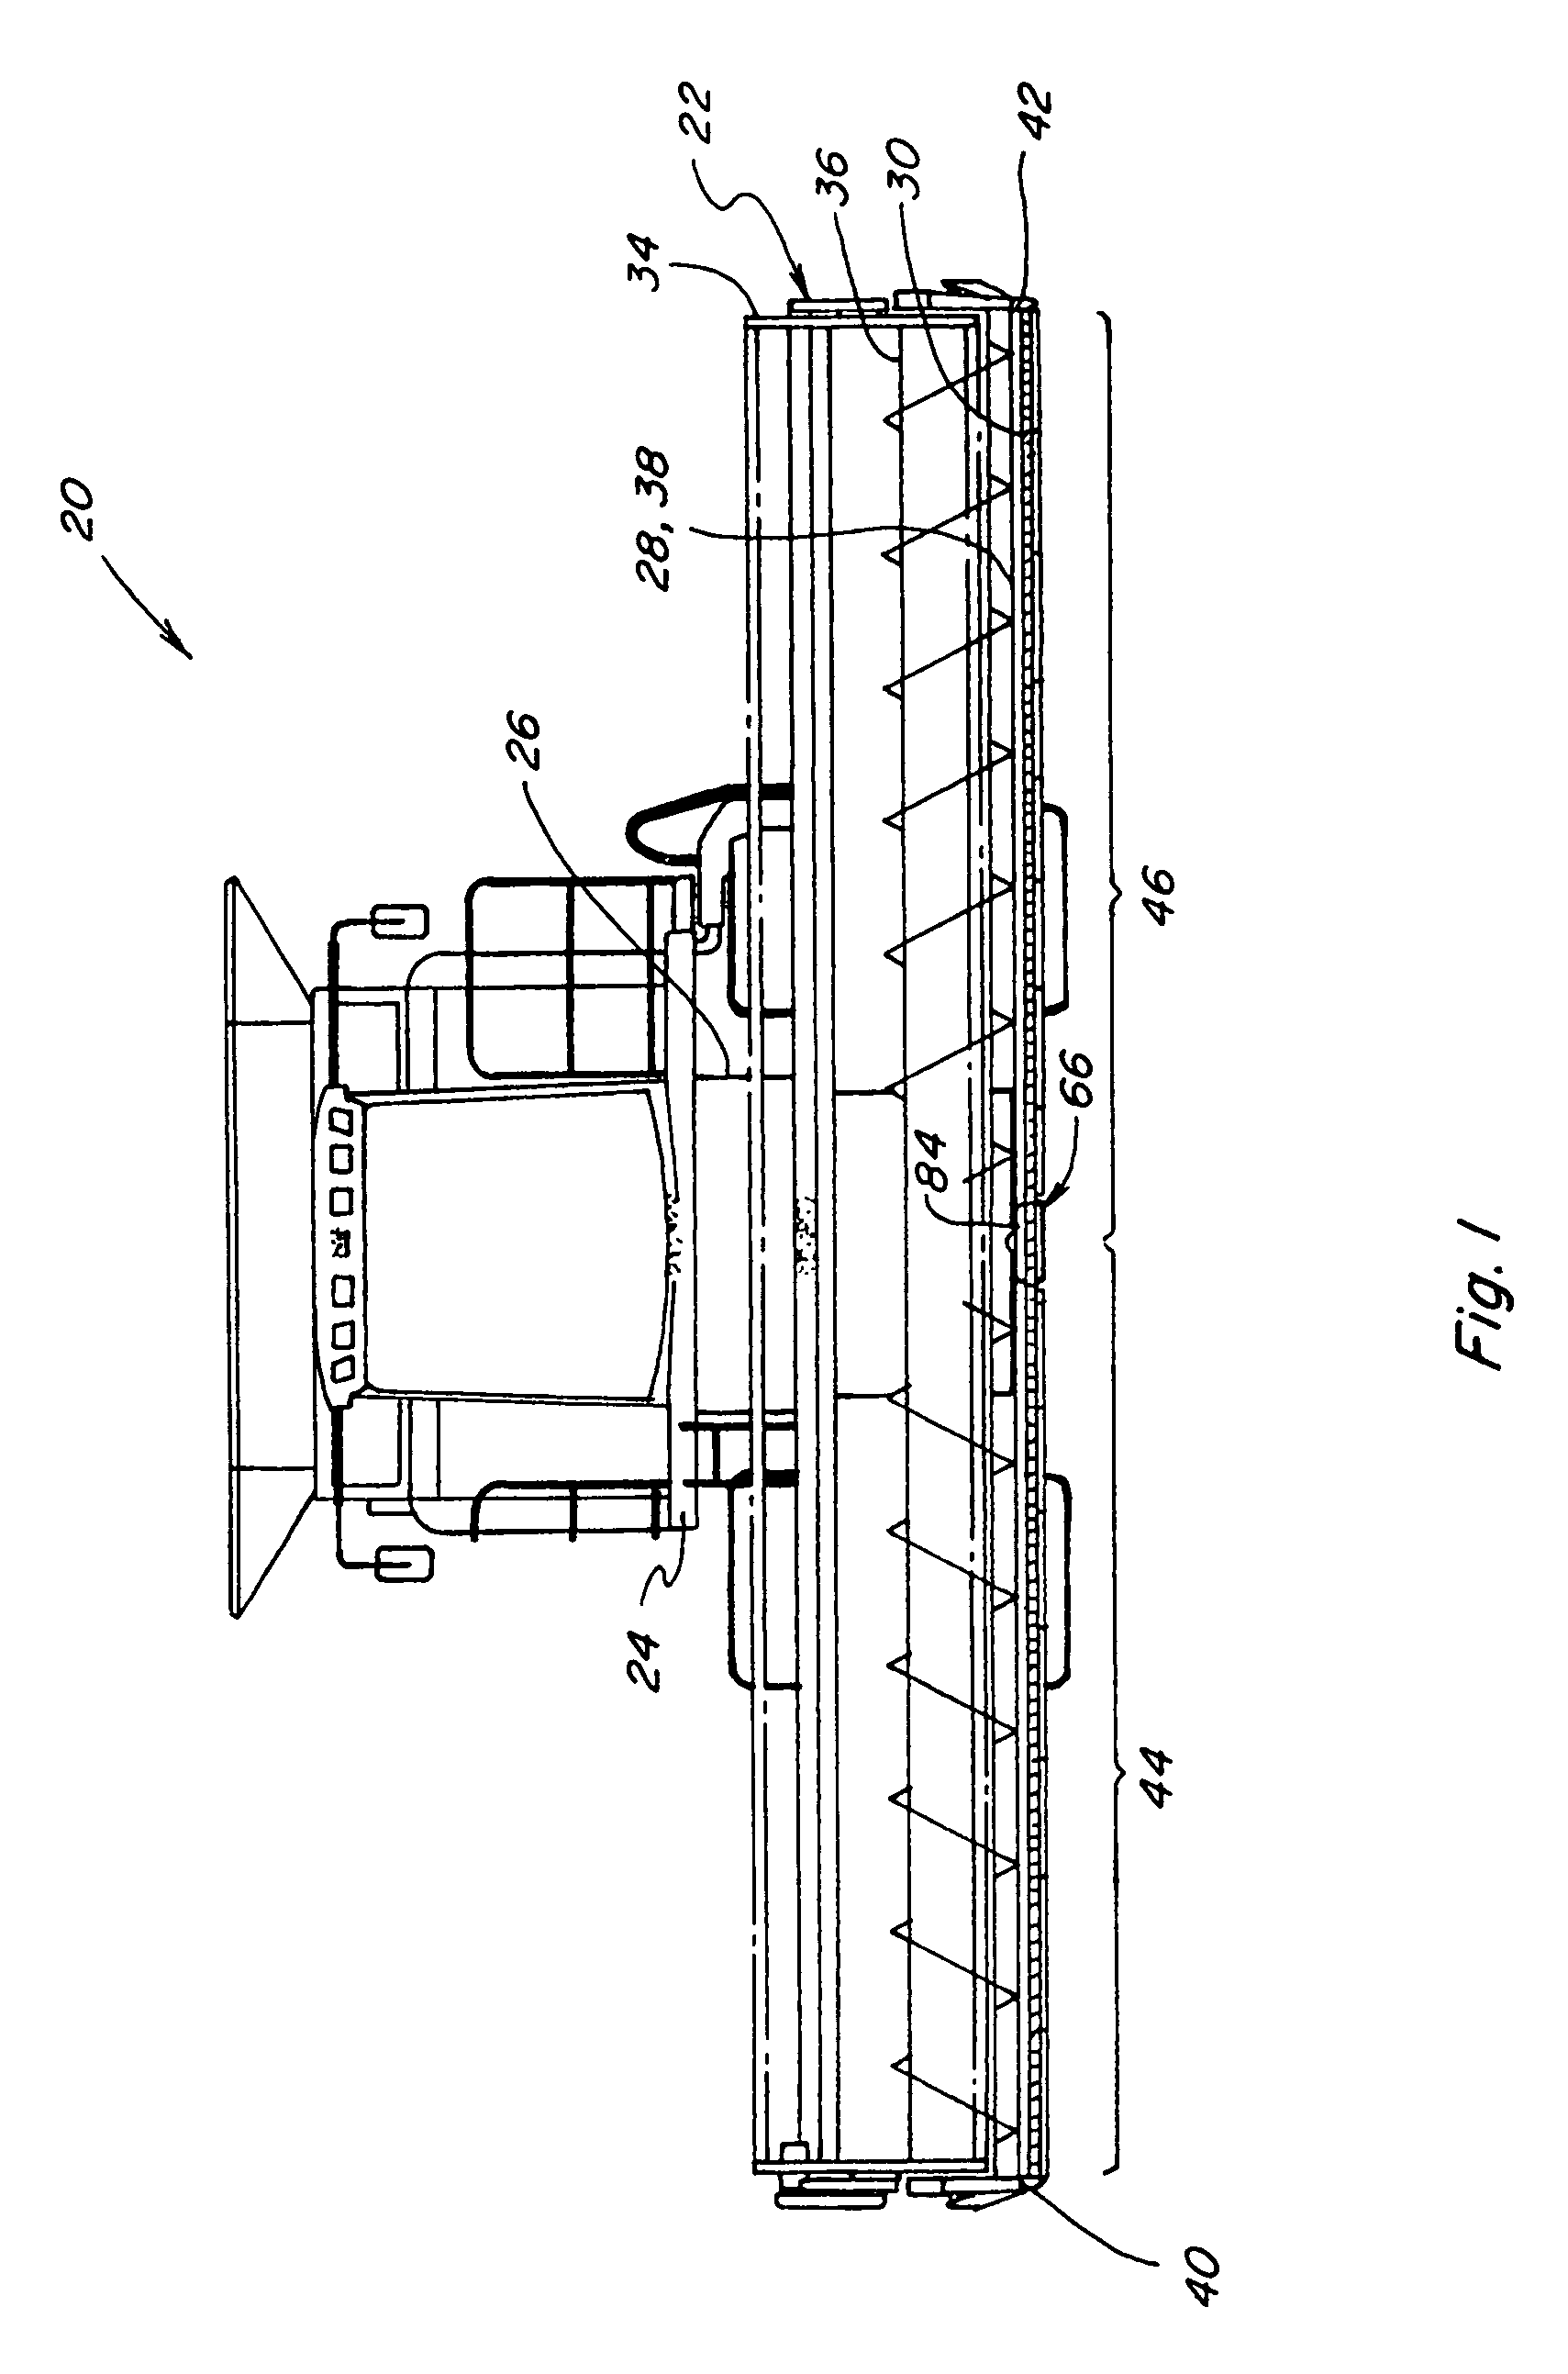 Offset epicyclic sickle drive for a header of an agricultural plant cutting machine